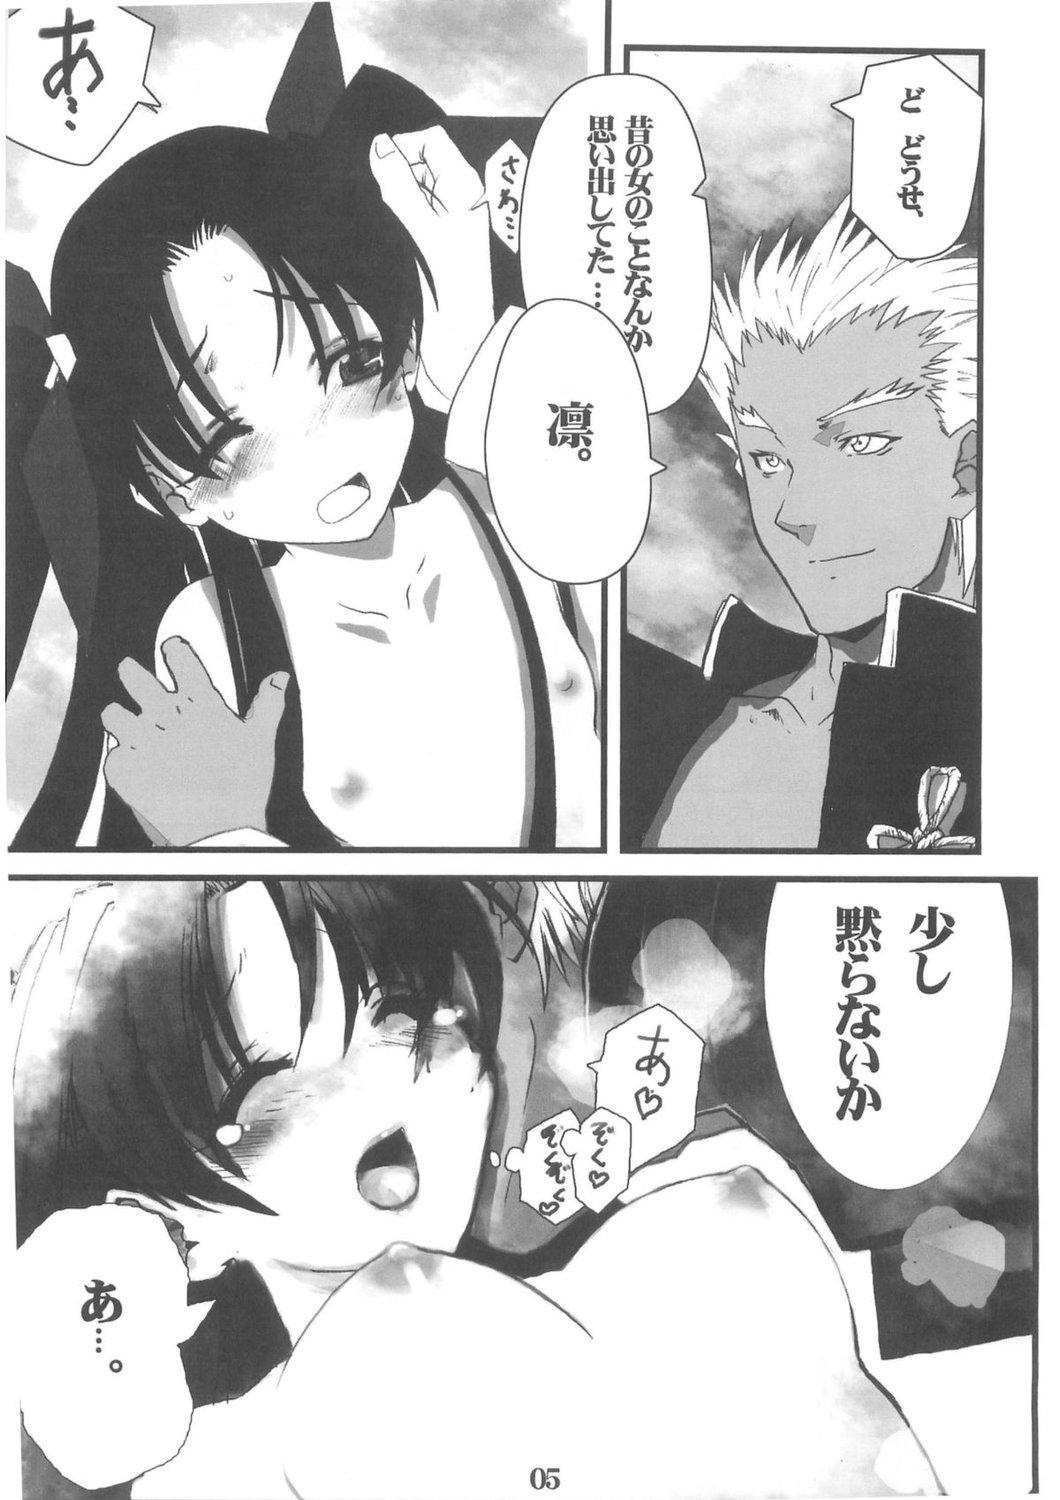 Flogging Berry Berry - Fate stay night Juicy - Page 5